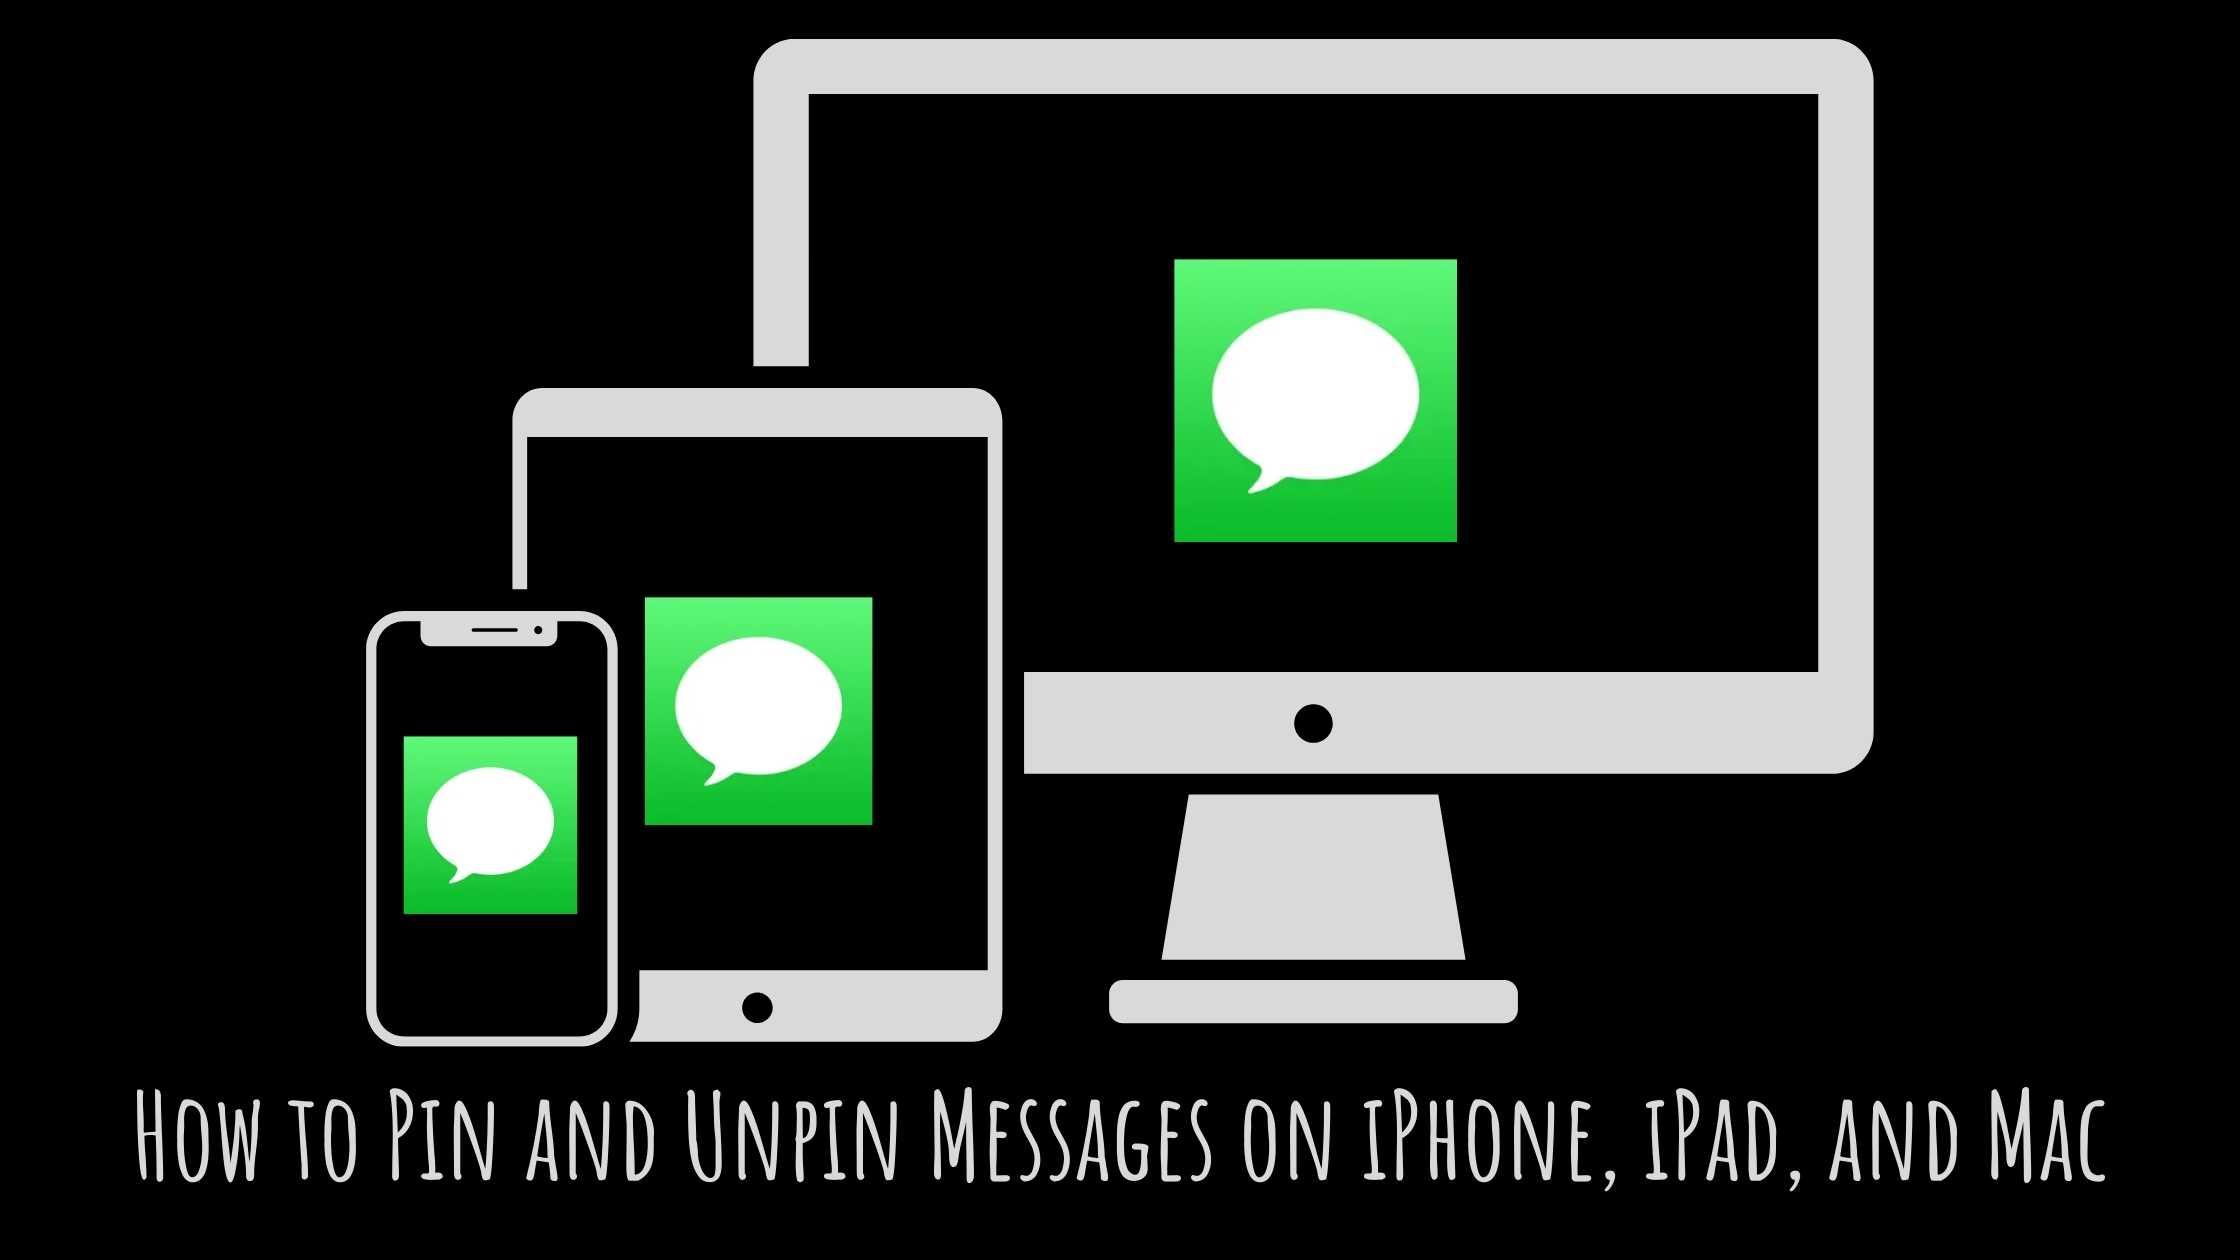 How to Pin and Unpin Messages on iPhone iPad and Mac